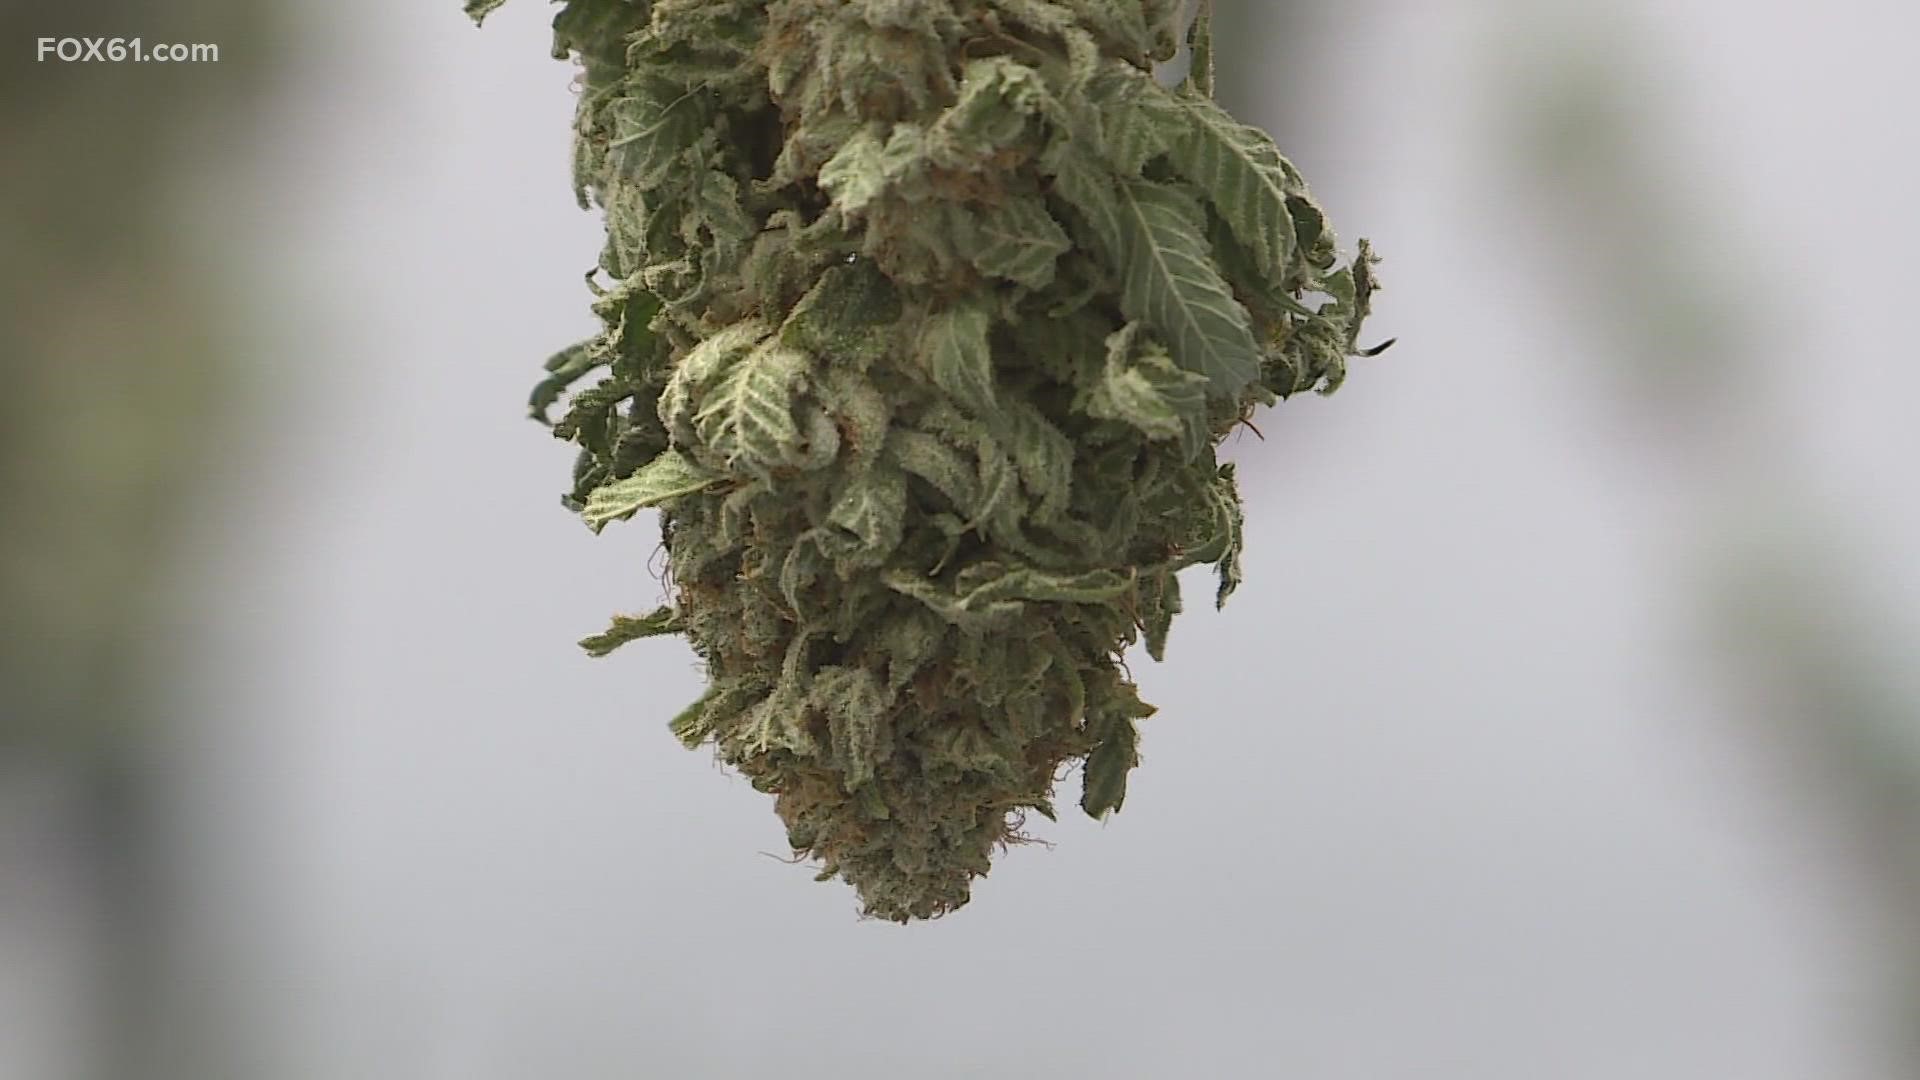 Marijuana possession has been legal for 18 months in Connecticut, but Tuesday was the first day it could be sold at retailers.